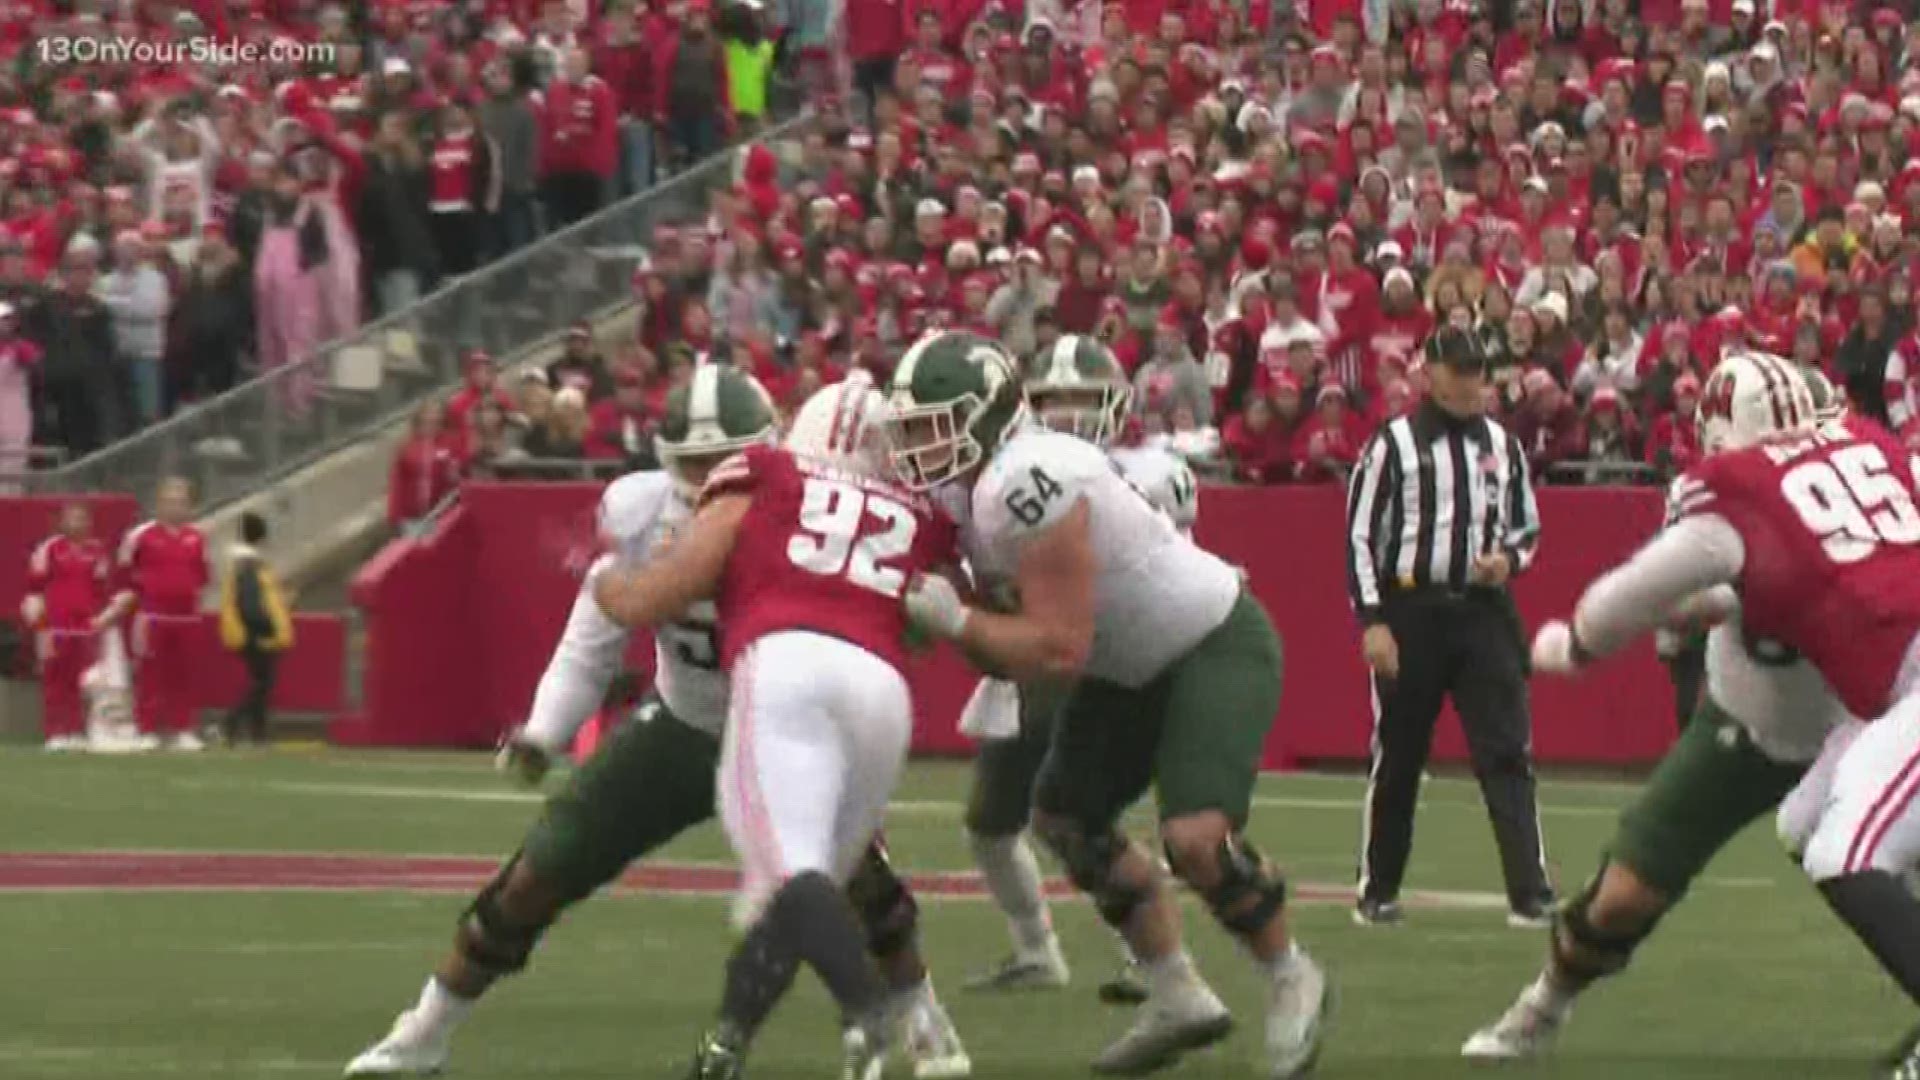 Michigan State lost to the Wisconsin Badgers 38-0.